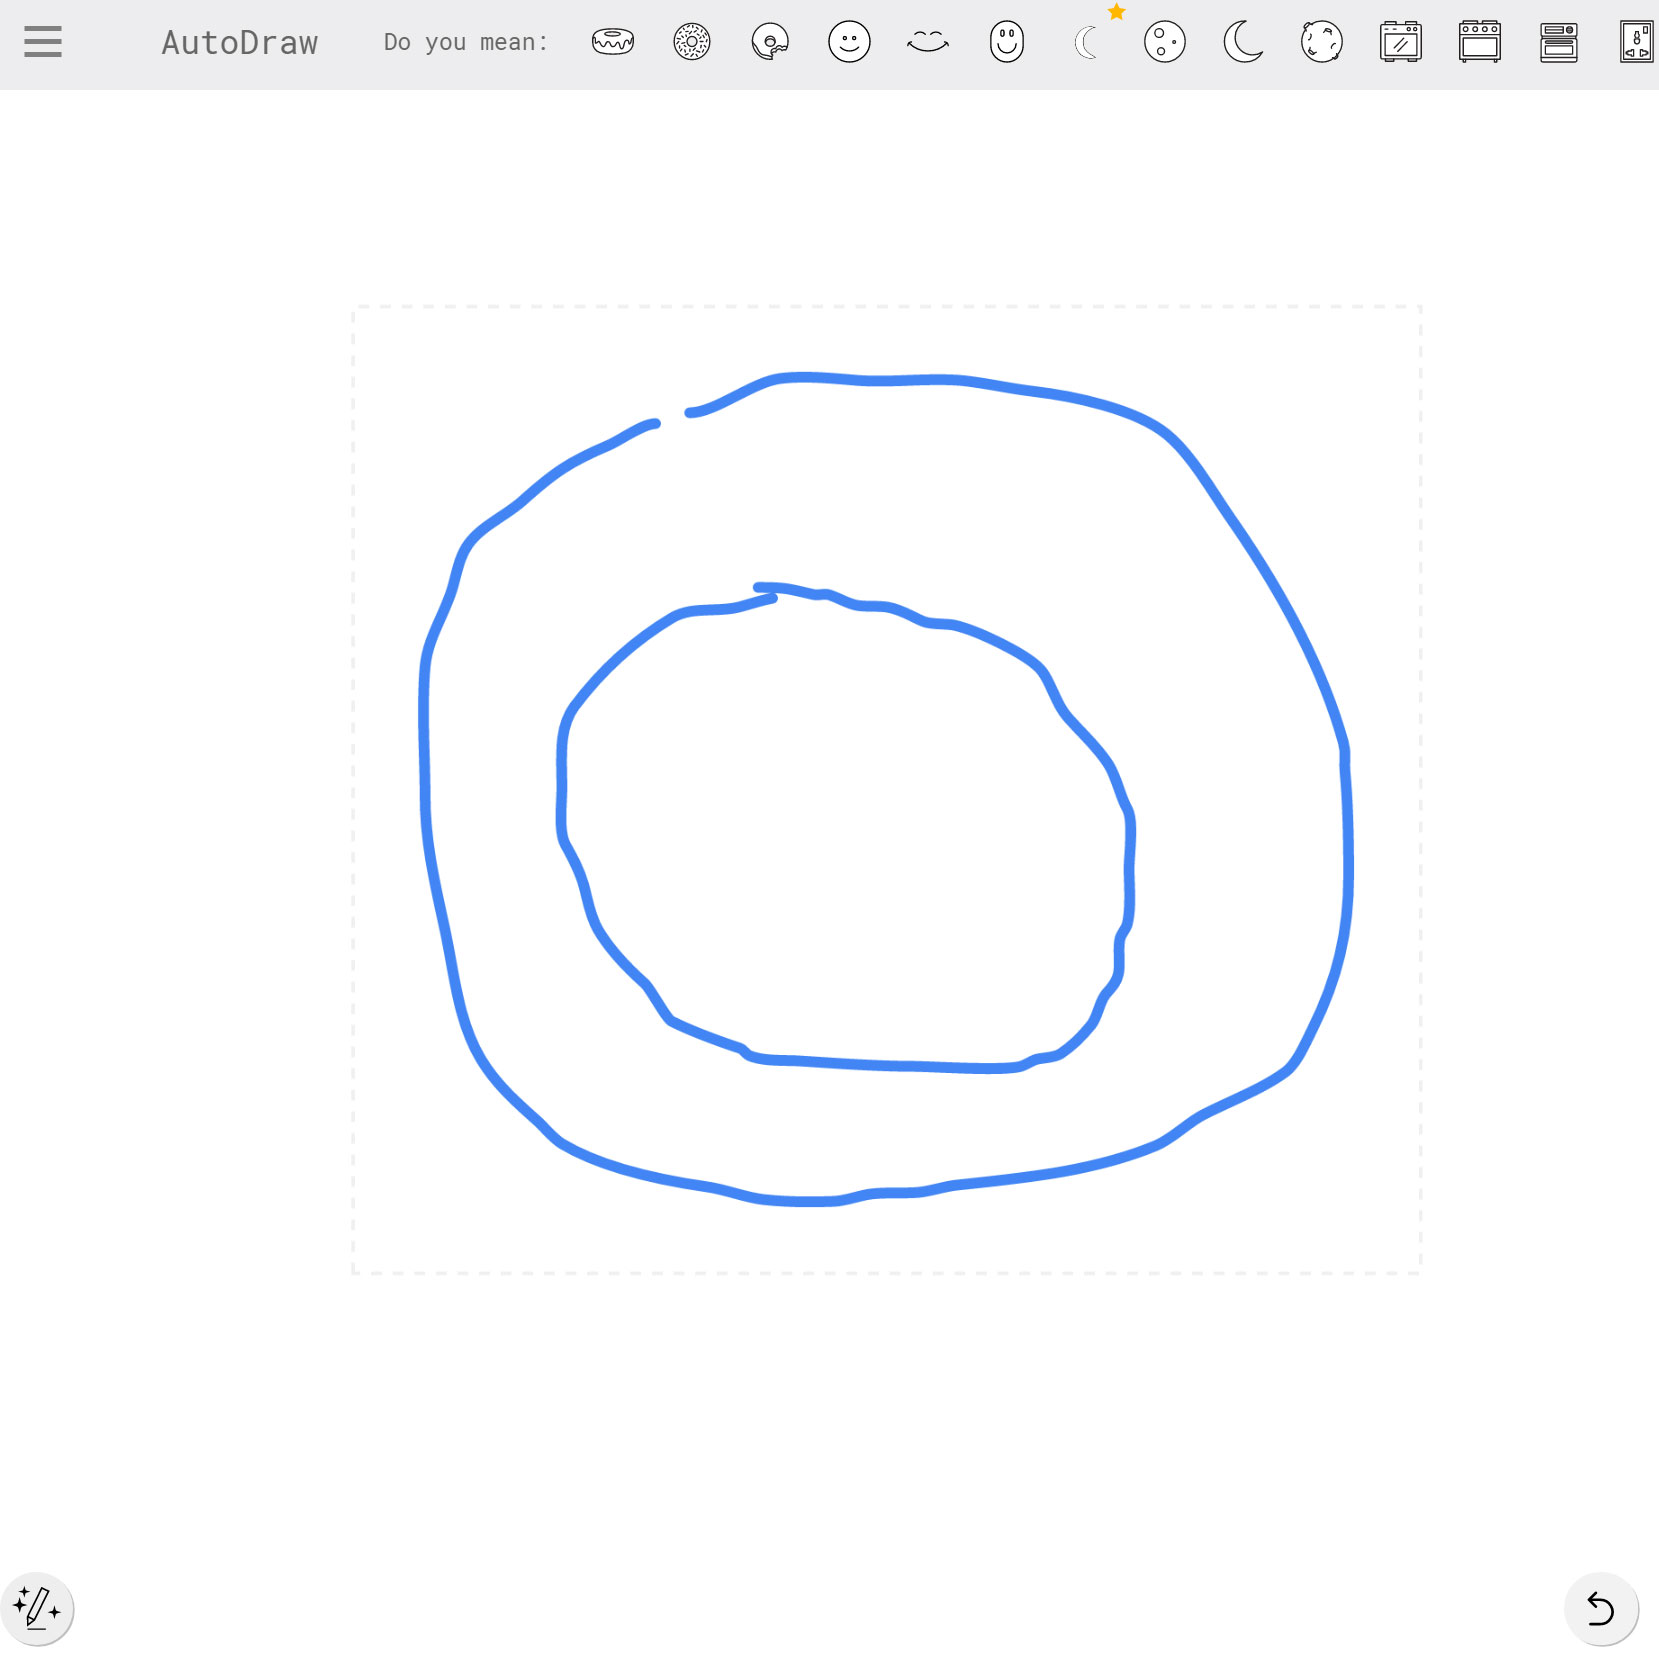 Google AutoDraw Instantly Transforms Your Terrible Scribbles Into